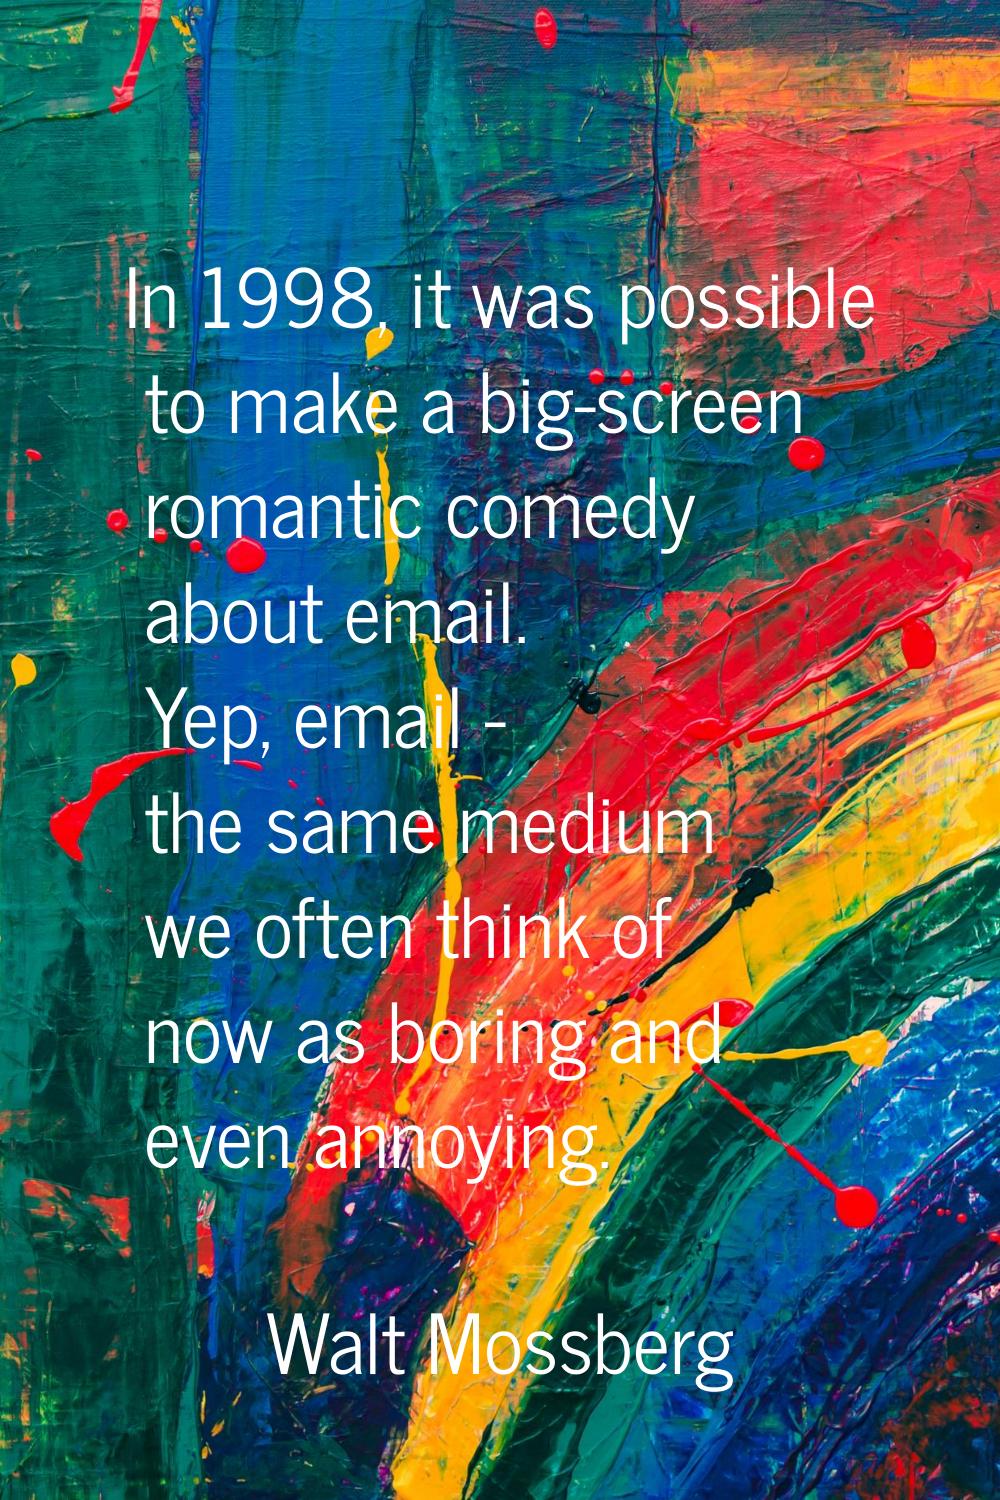 In 1998, it was possible to make a big-screen romantic comedy about email. Yep, email - the same me